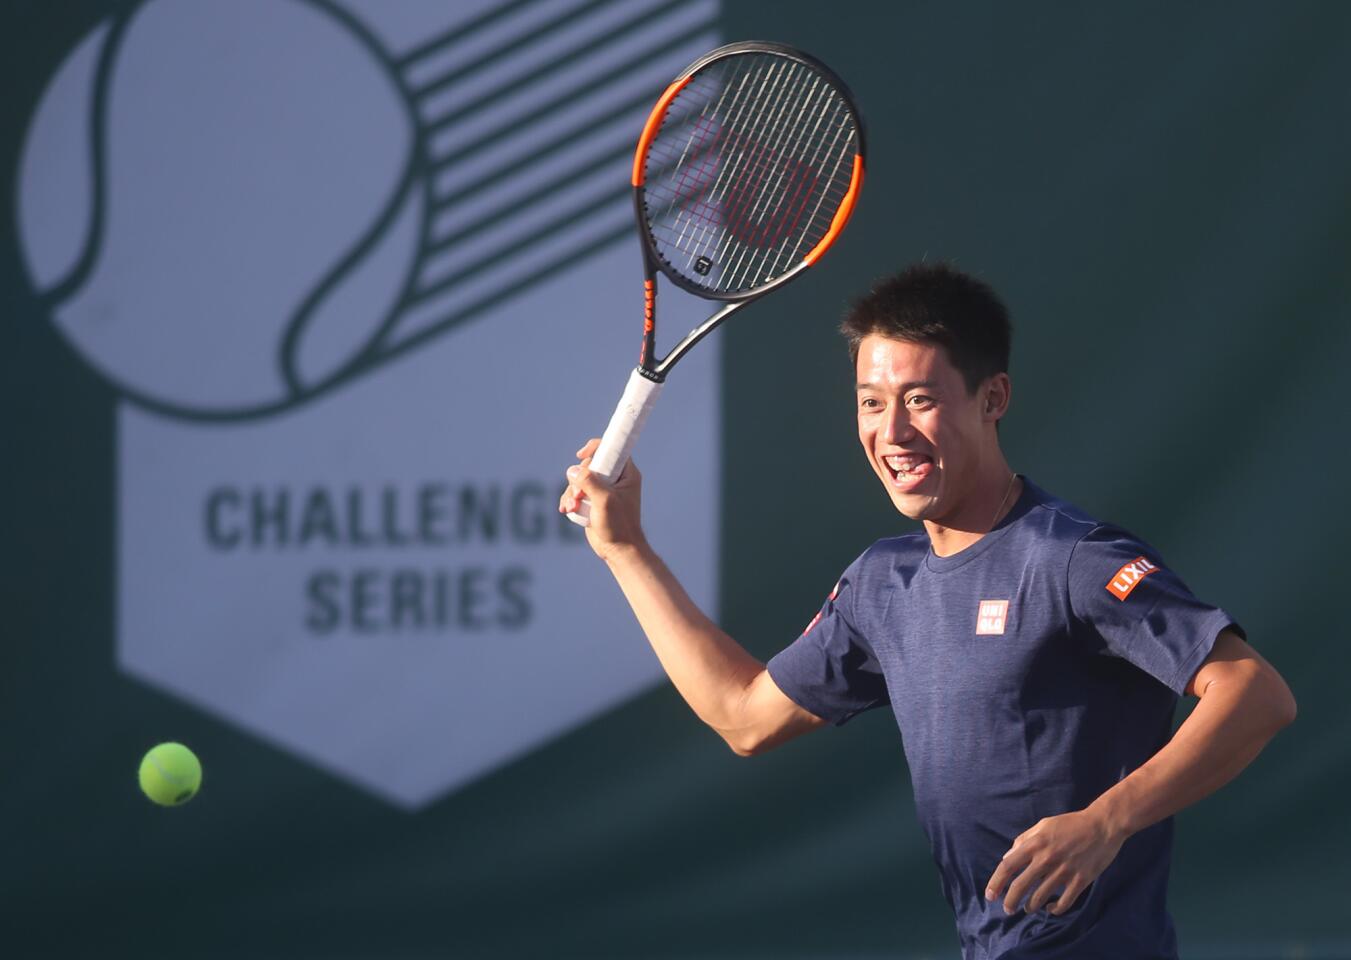 Japan's No. 1 rated player Kei Nishikori, makes a forehand return as he participates in the 8th annual Michael Chang Tennis Classic at the Newport Beach Tennis Club on Saturday. The event raise funds for HomeAid Orange County and the Chang Family Foundation.